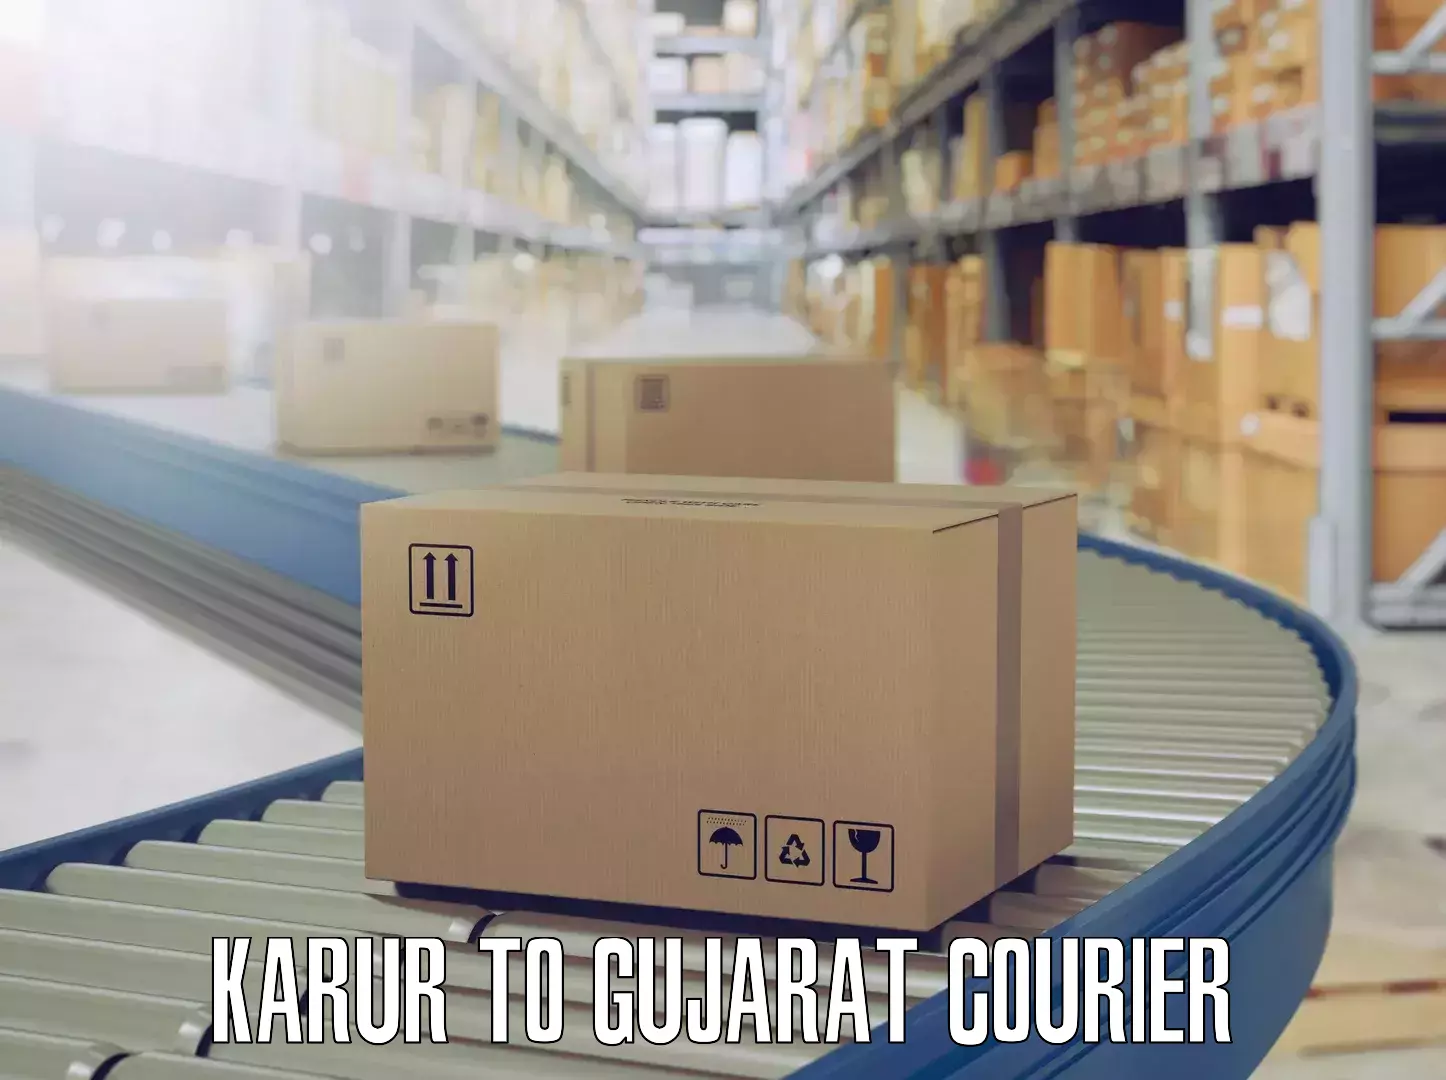 Trusted moving company Karur to Gujarat